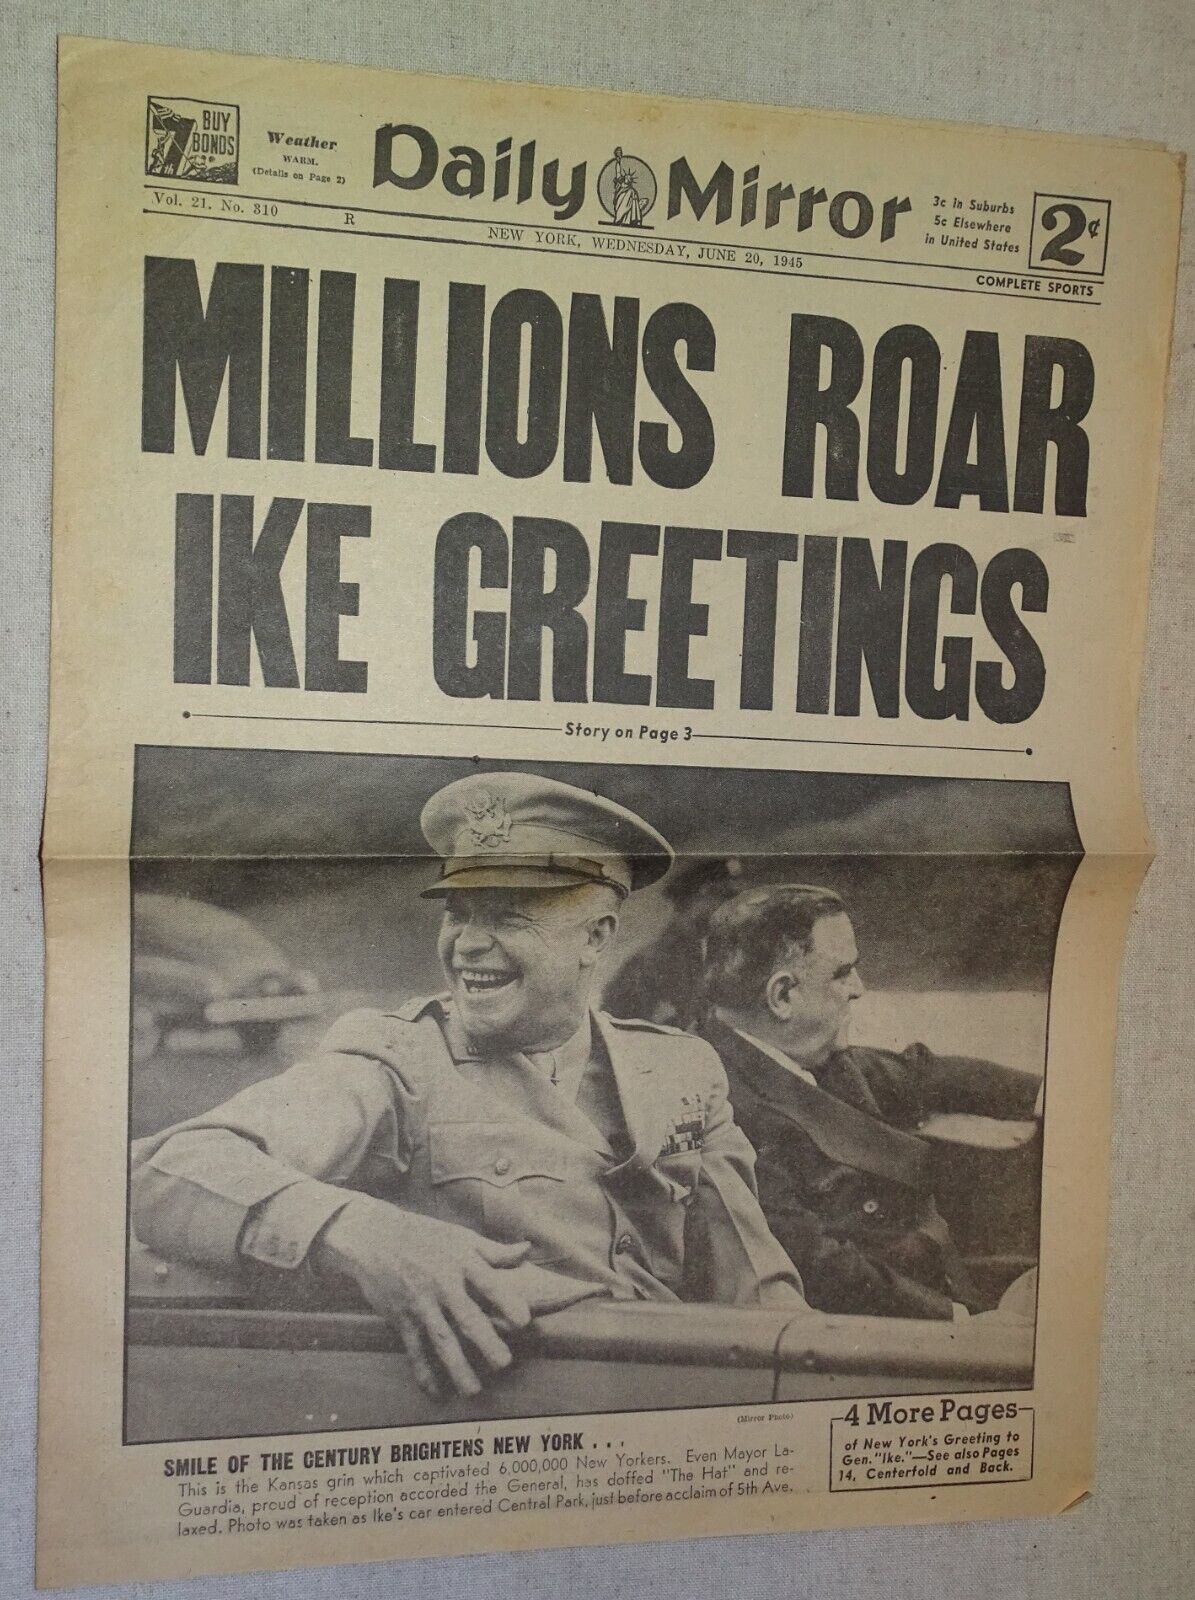 MILLIONS ROAR IKE GREETINGS June 20 1945 NY Daily Mirror NEWSPAPER Front Page